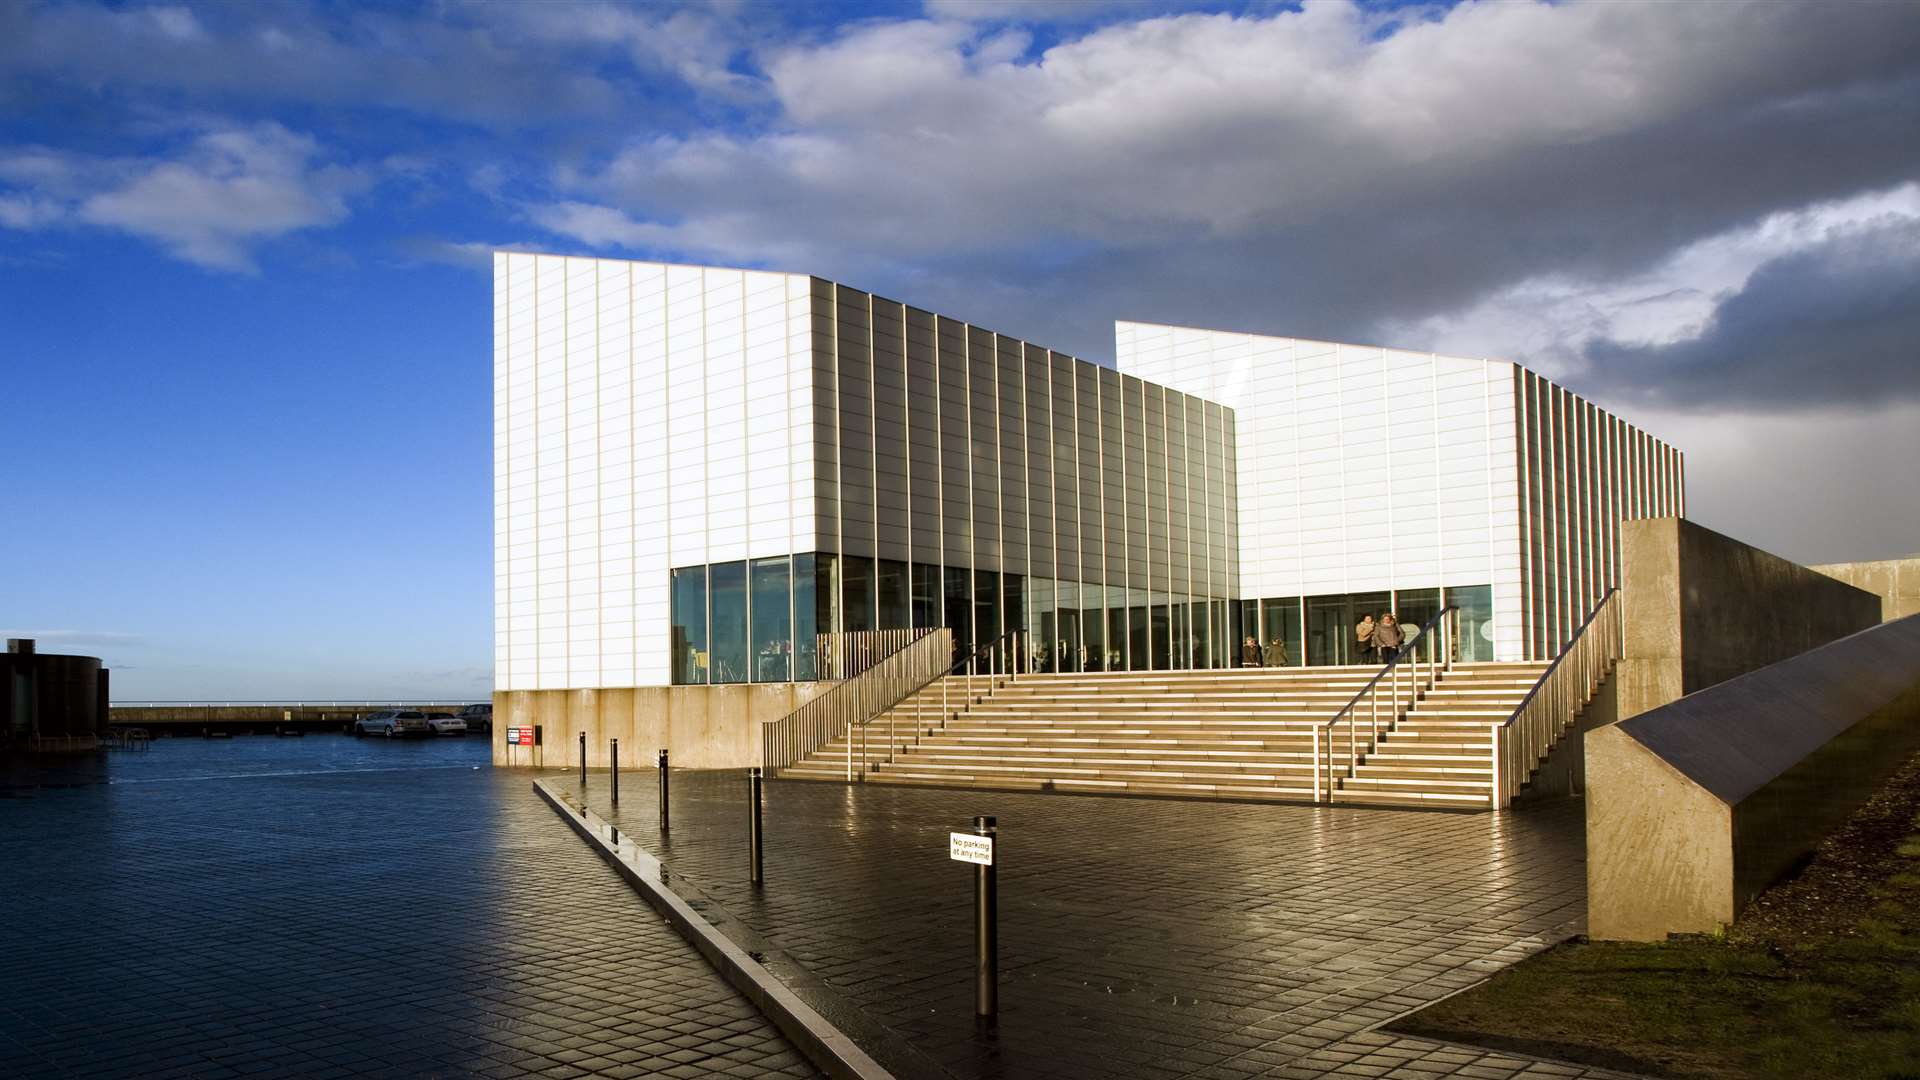 Turner Contemporary on Margate seafront